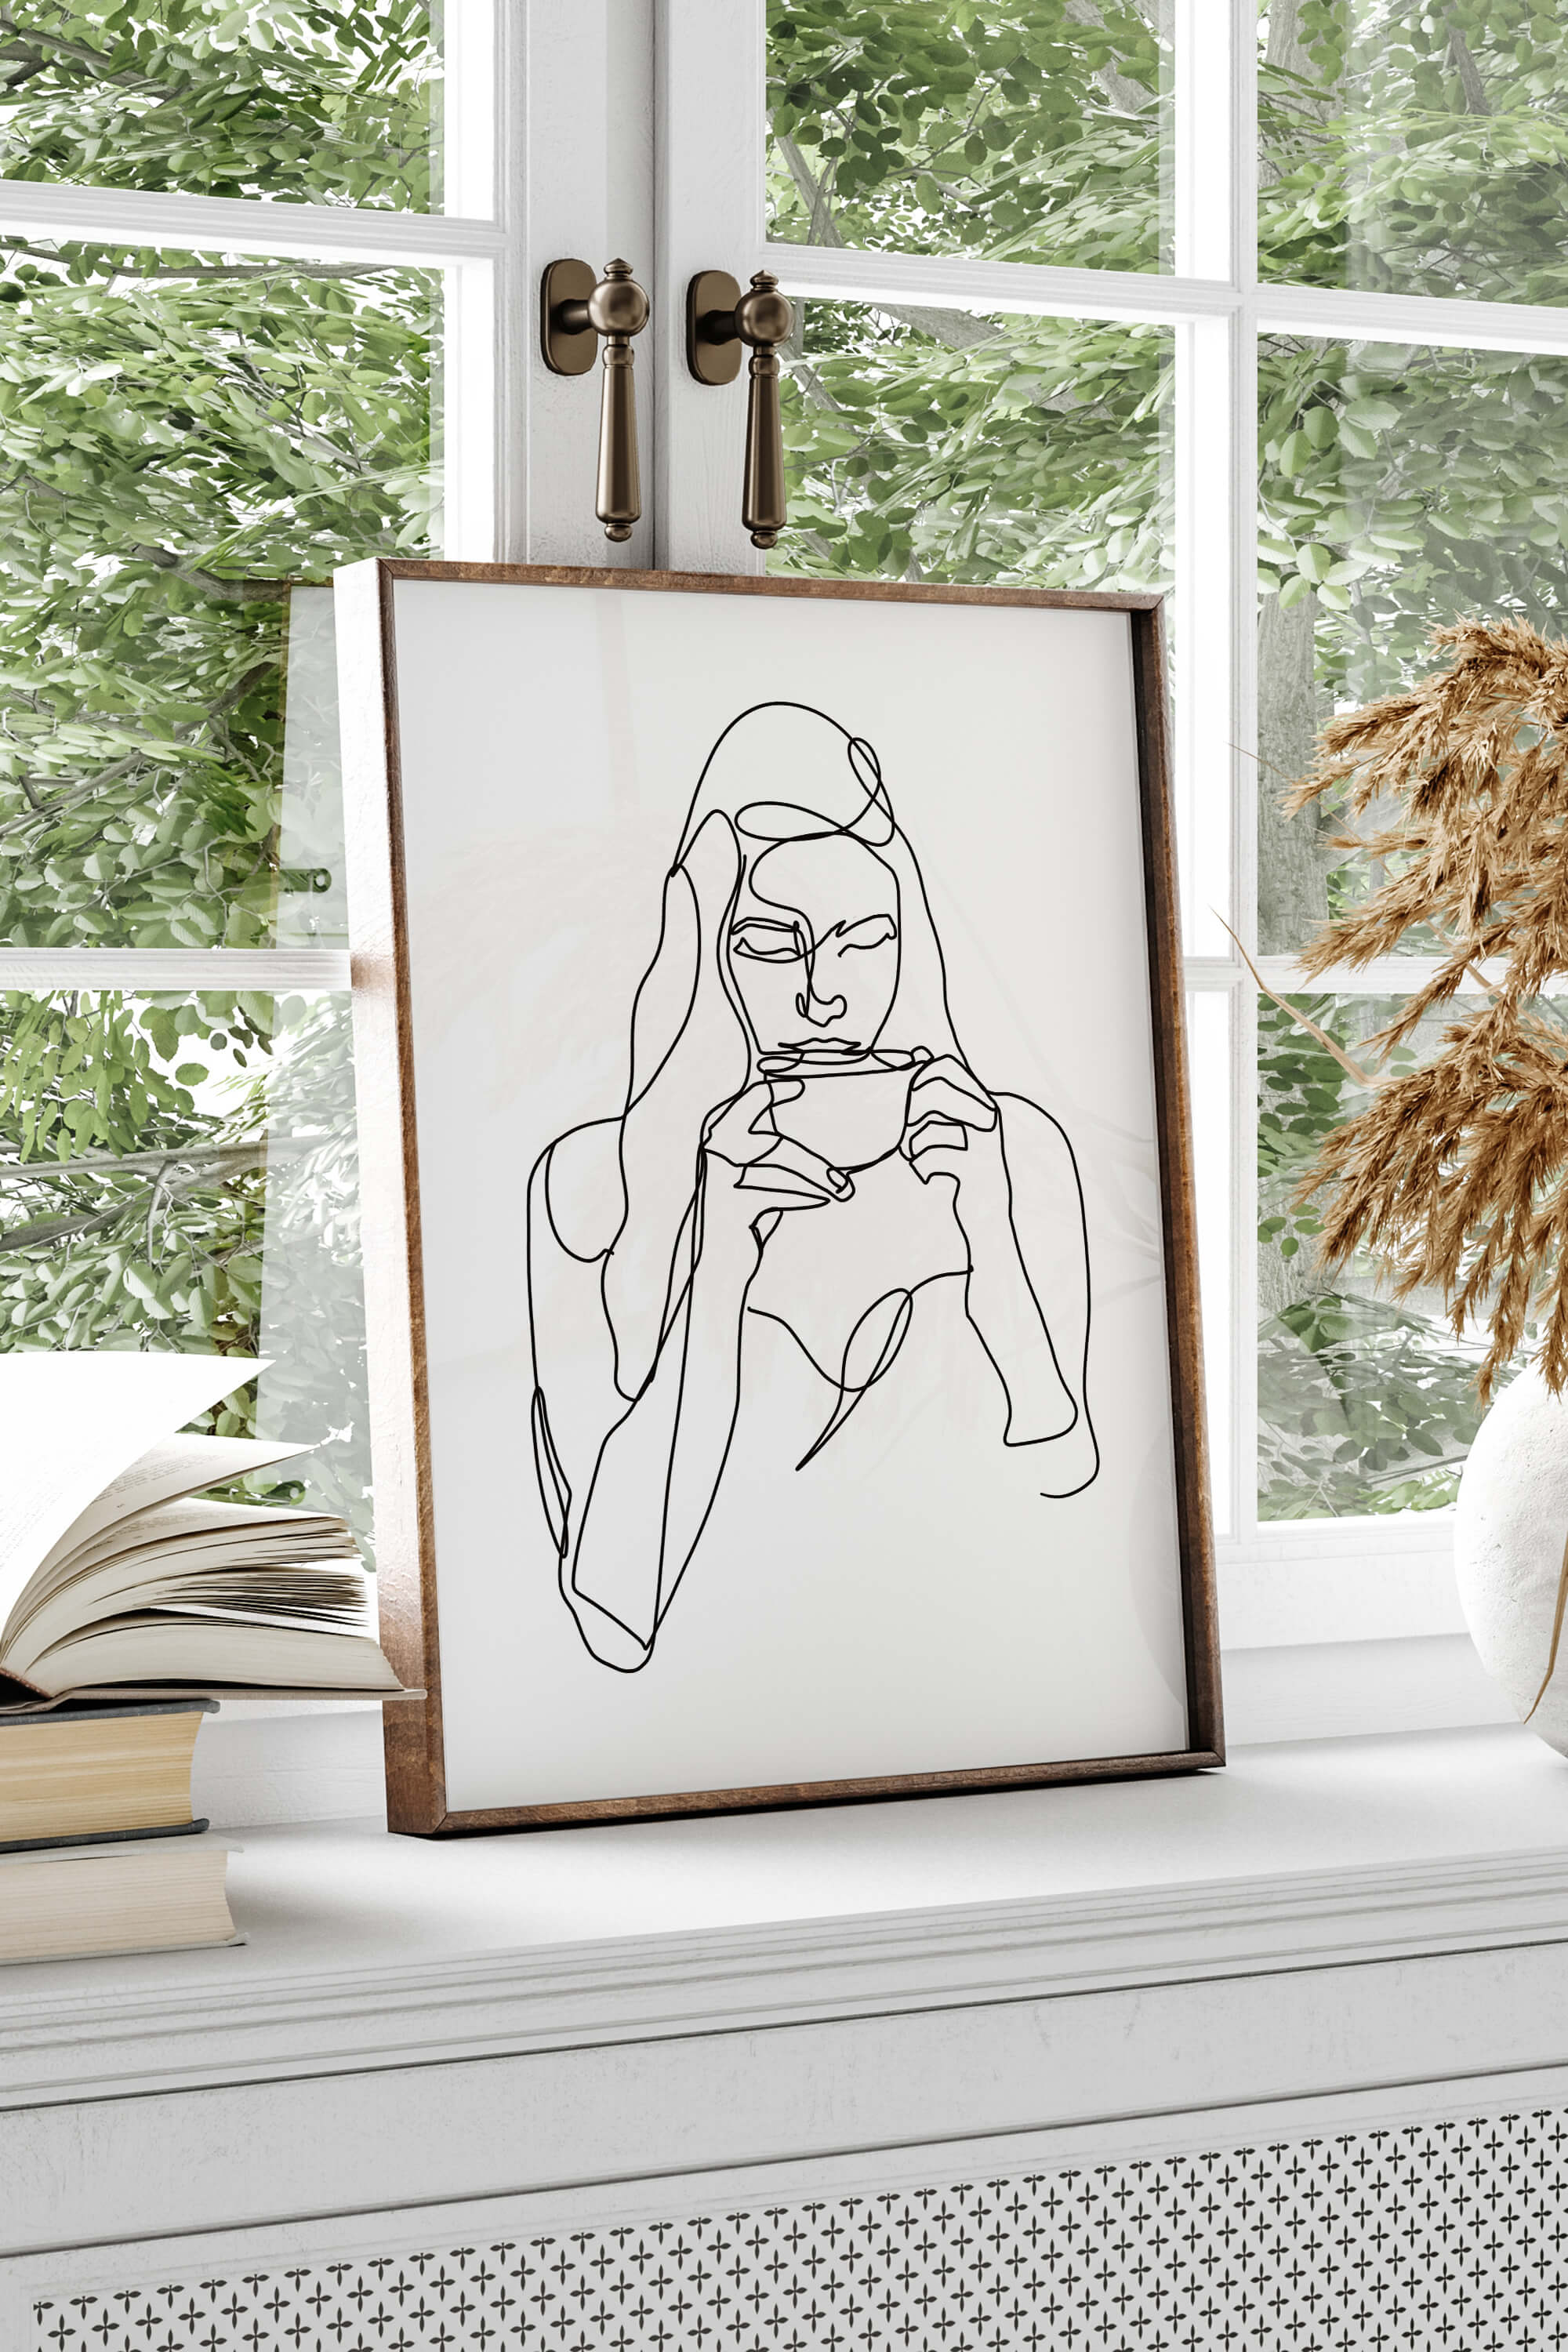 Experience the harmonious dance of a minimalist line art woman and coffee cup in this coffee art print—a daily reminder to savor life's moments.